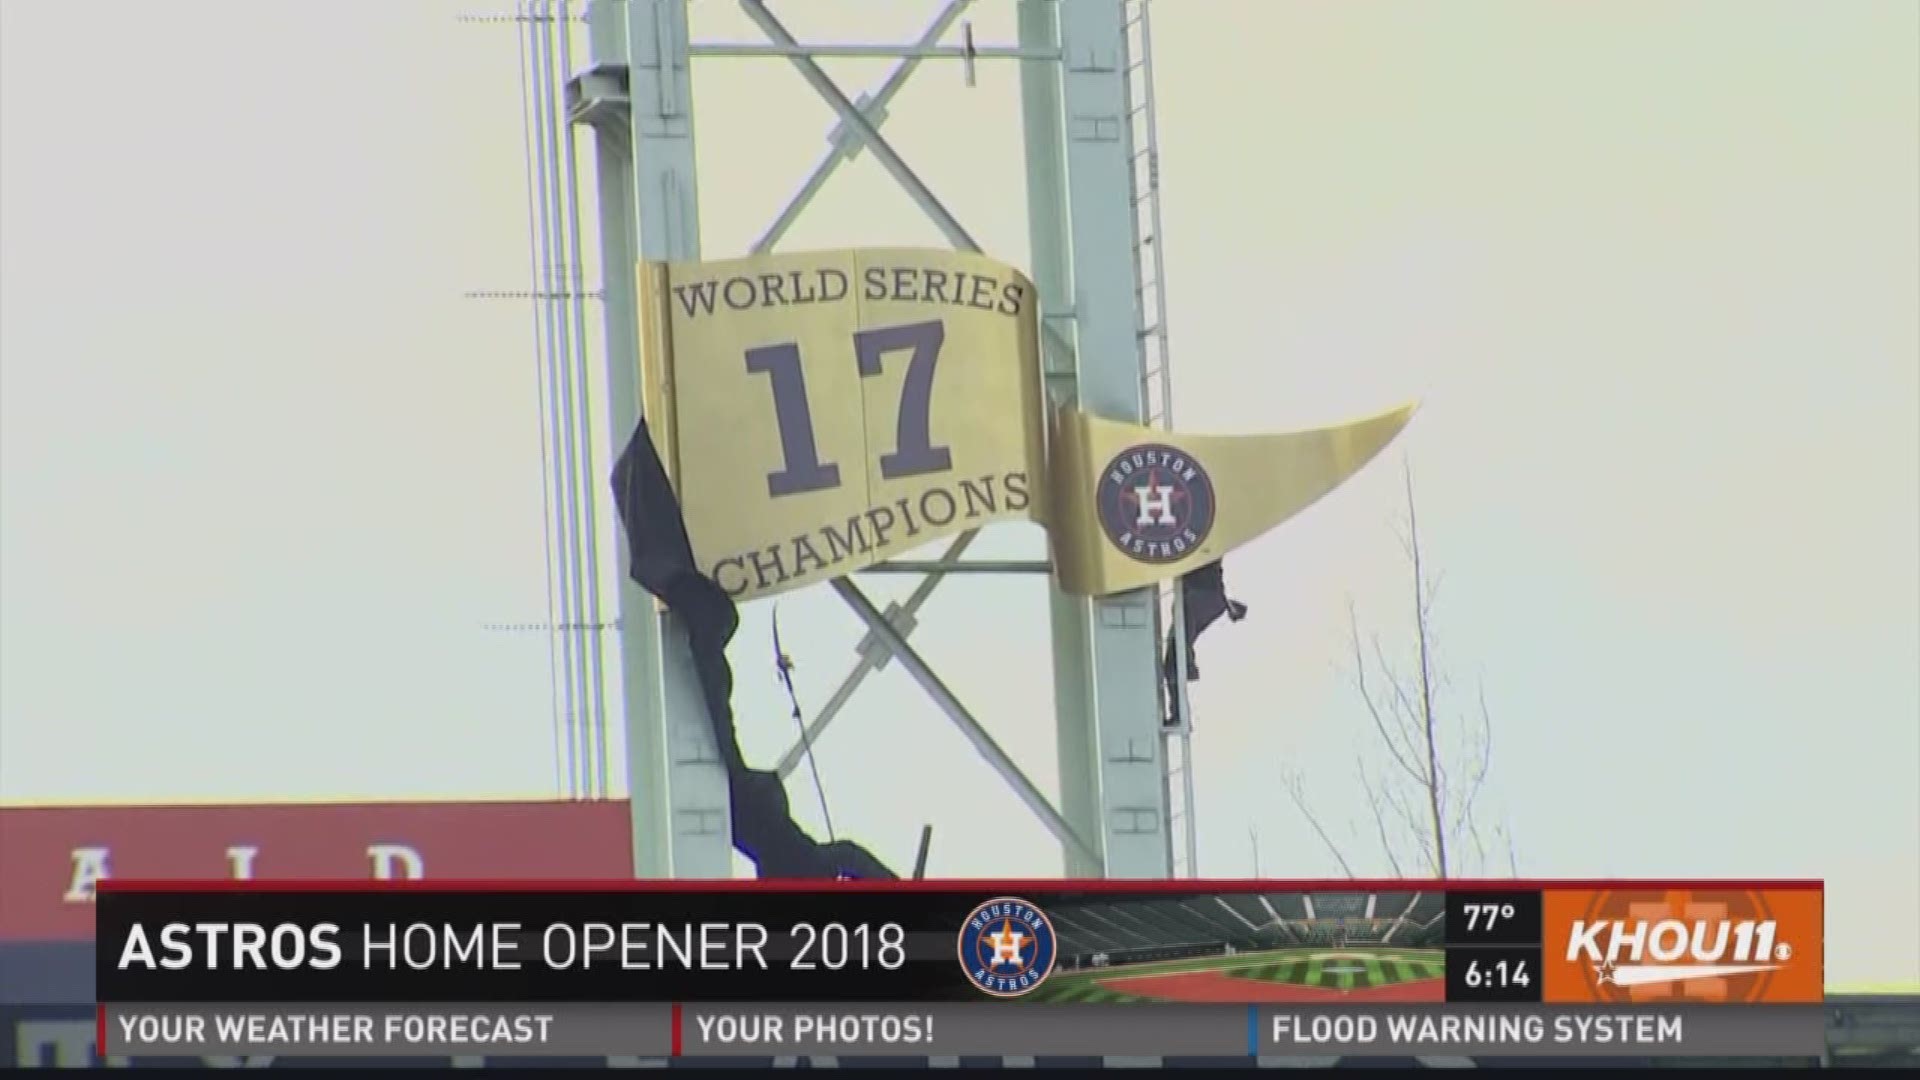 The Houston Astros unveiled their World Series Championship pennant Monday night before their home opener against the Baltimore Orioles.